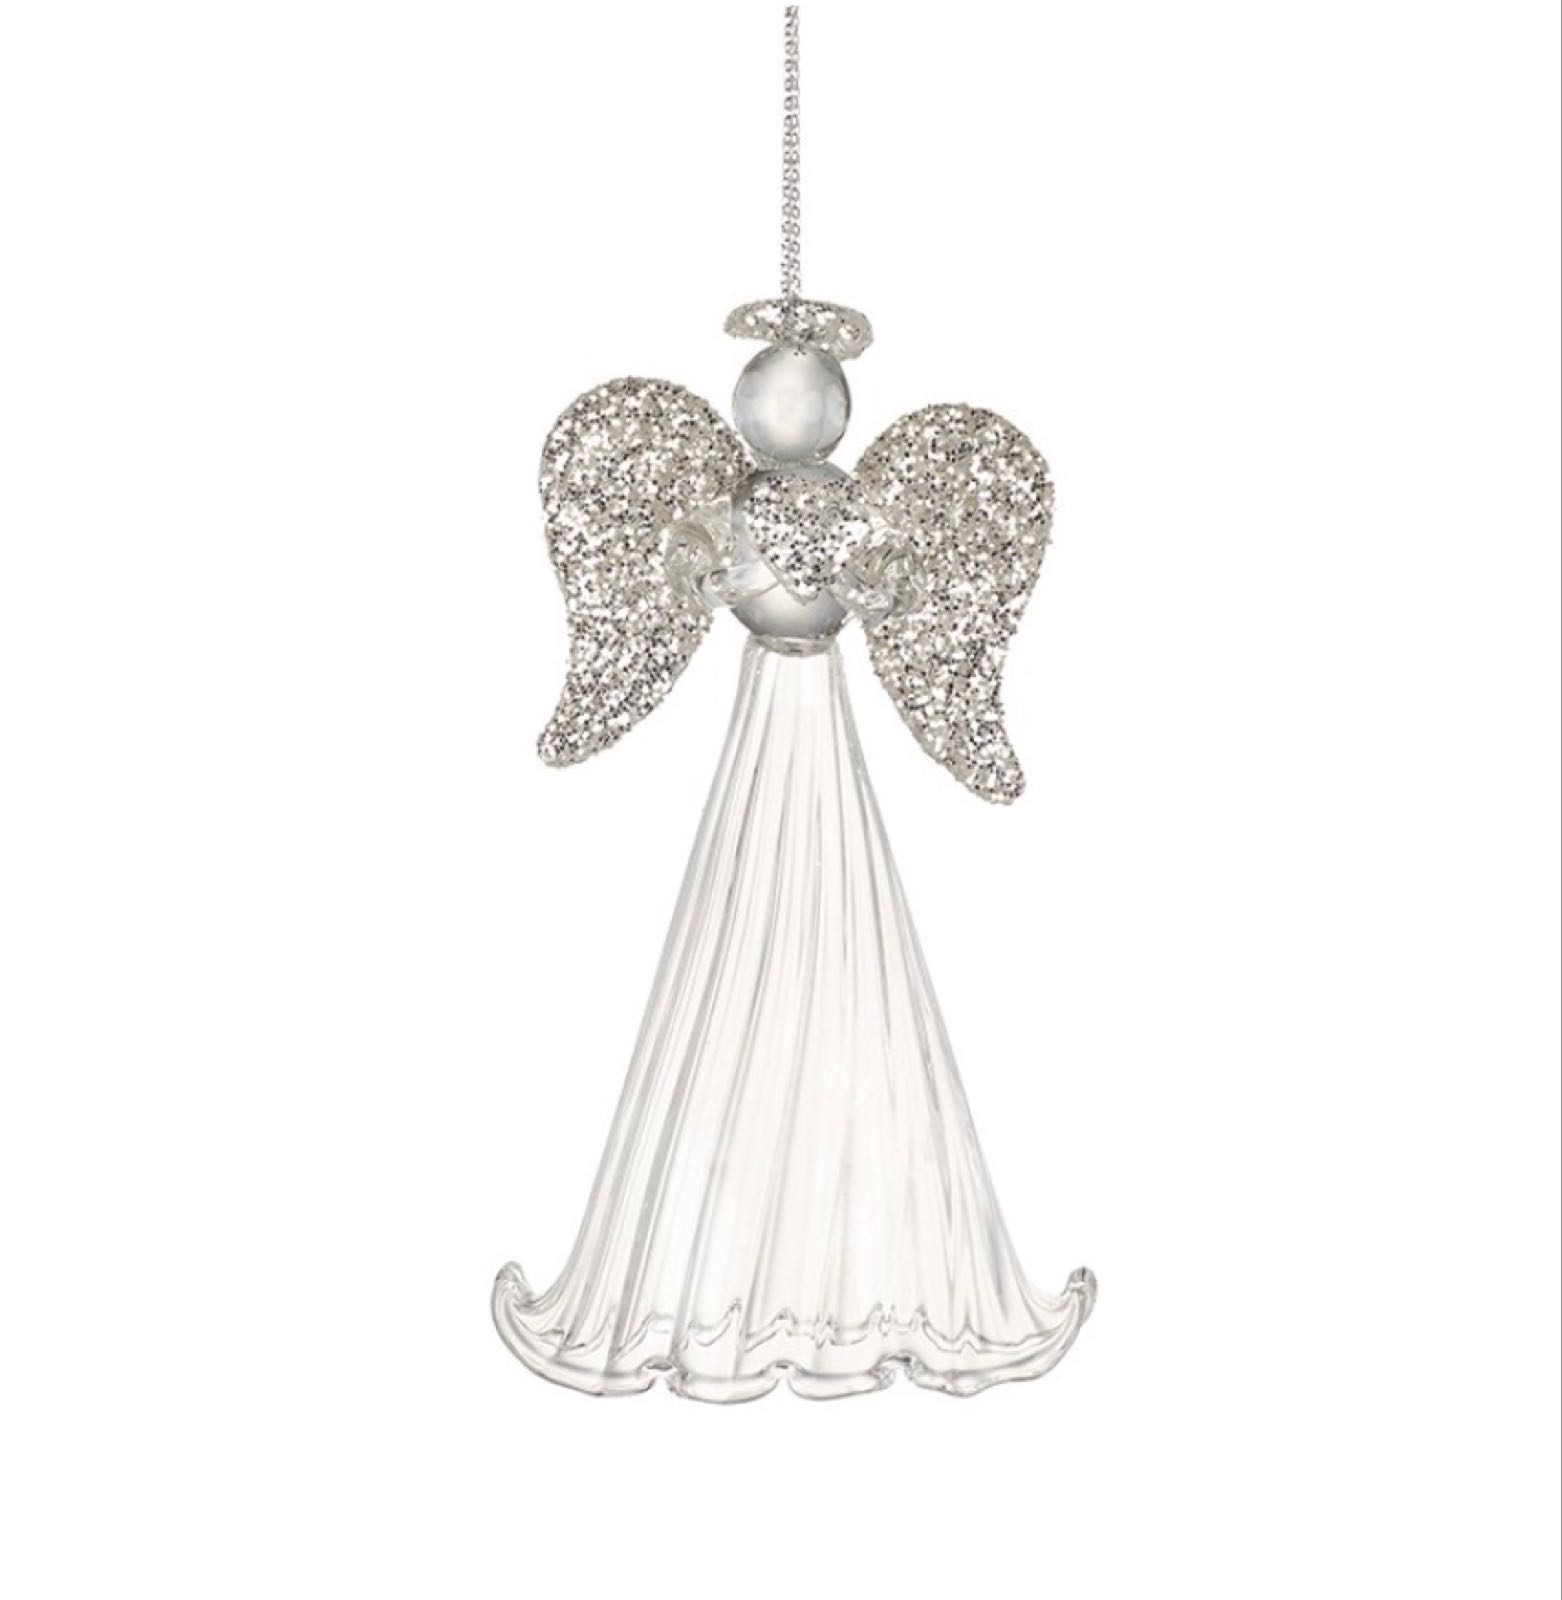 Glass Angel with glitter heart